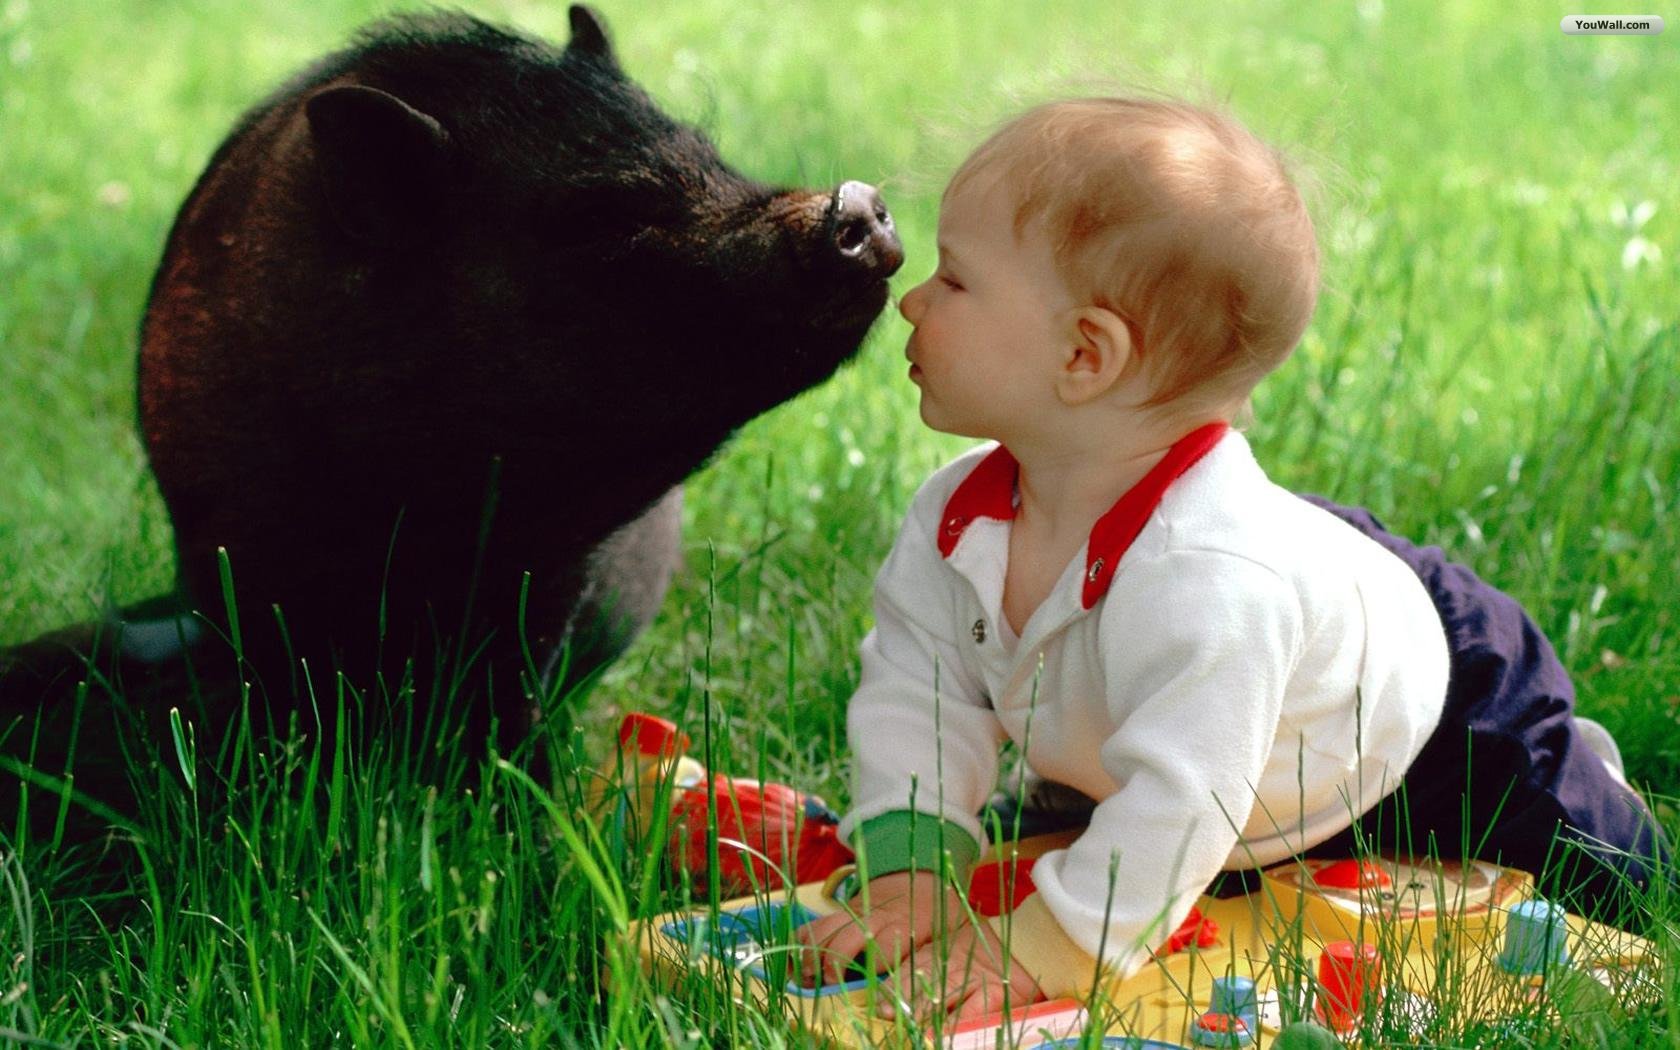 The Baby and The Pig Wallpaper   wallpaperwallpapersfree wallpaper